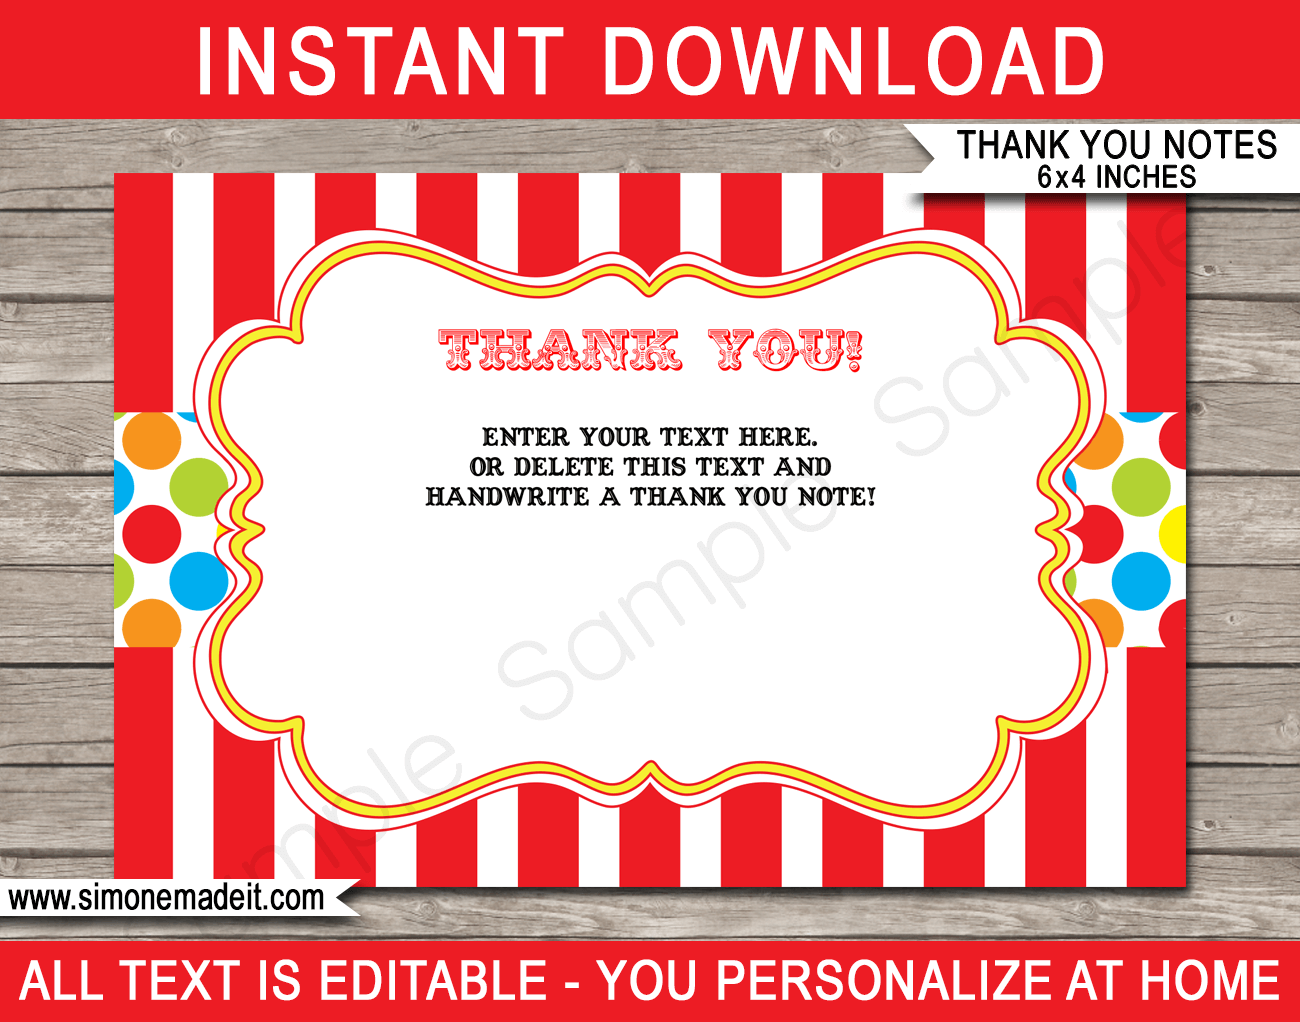 Printable Carnival Party Thank You Cards - Favor Tags - Circus or Carnival Birthday Party theme - Editable Template - Instant Download via simonemadeit.com